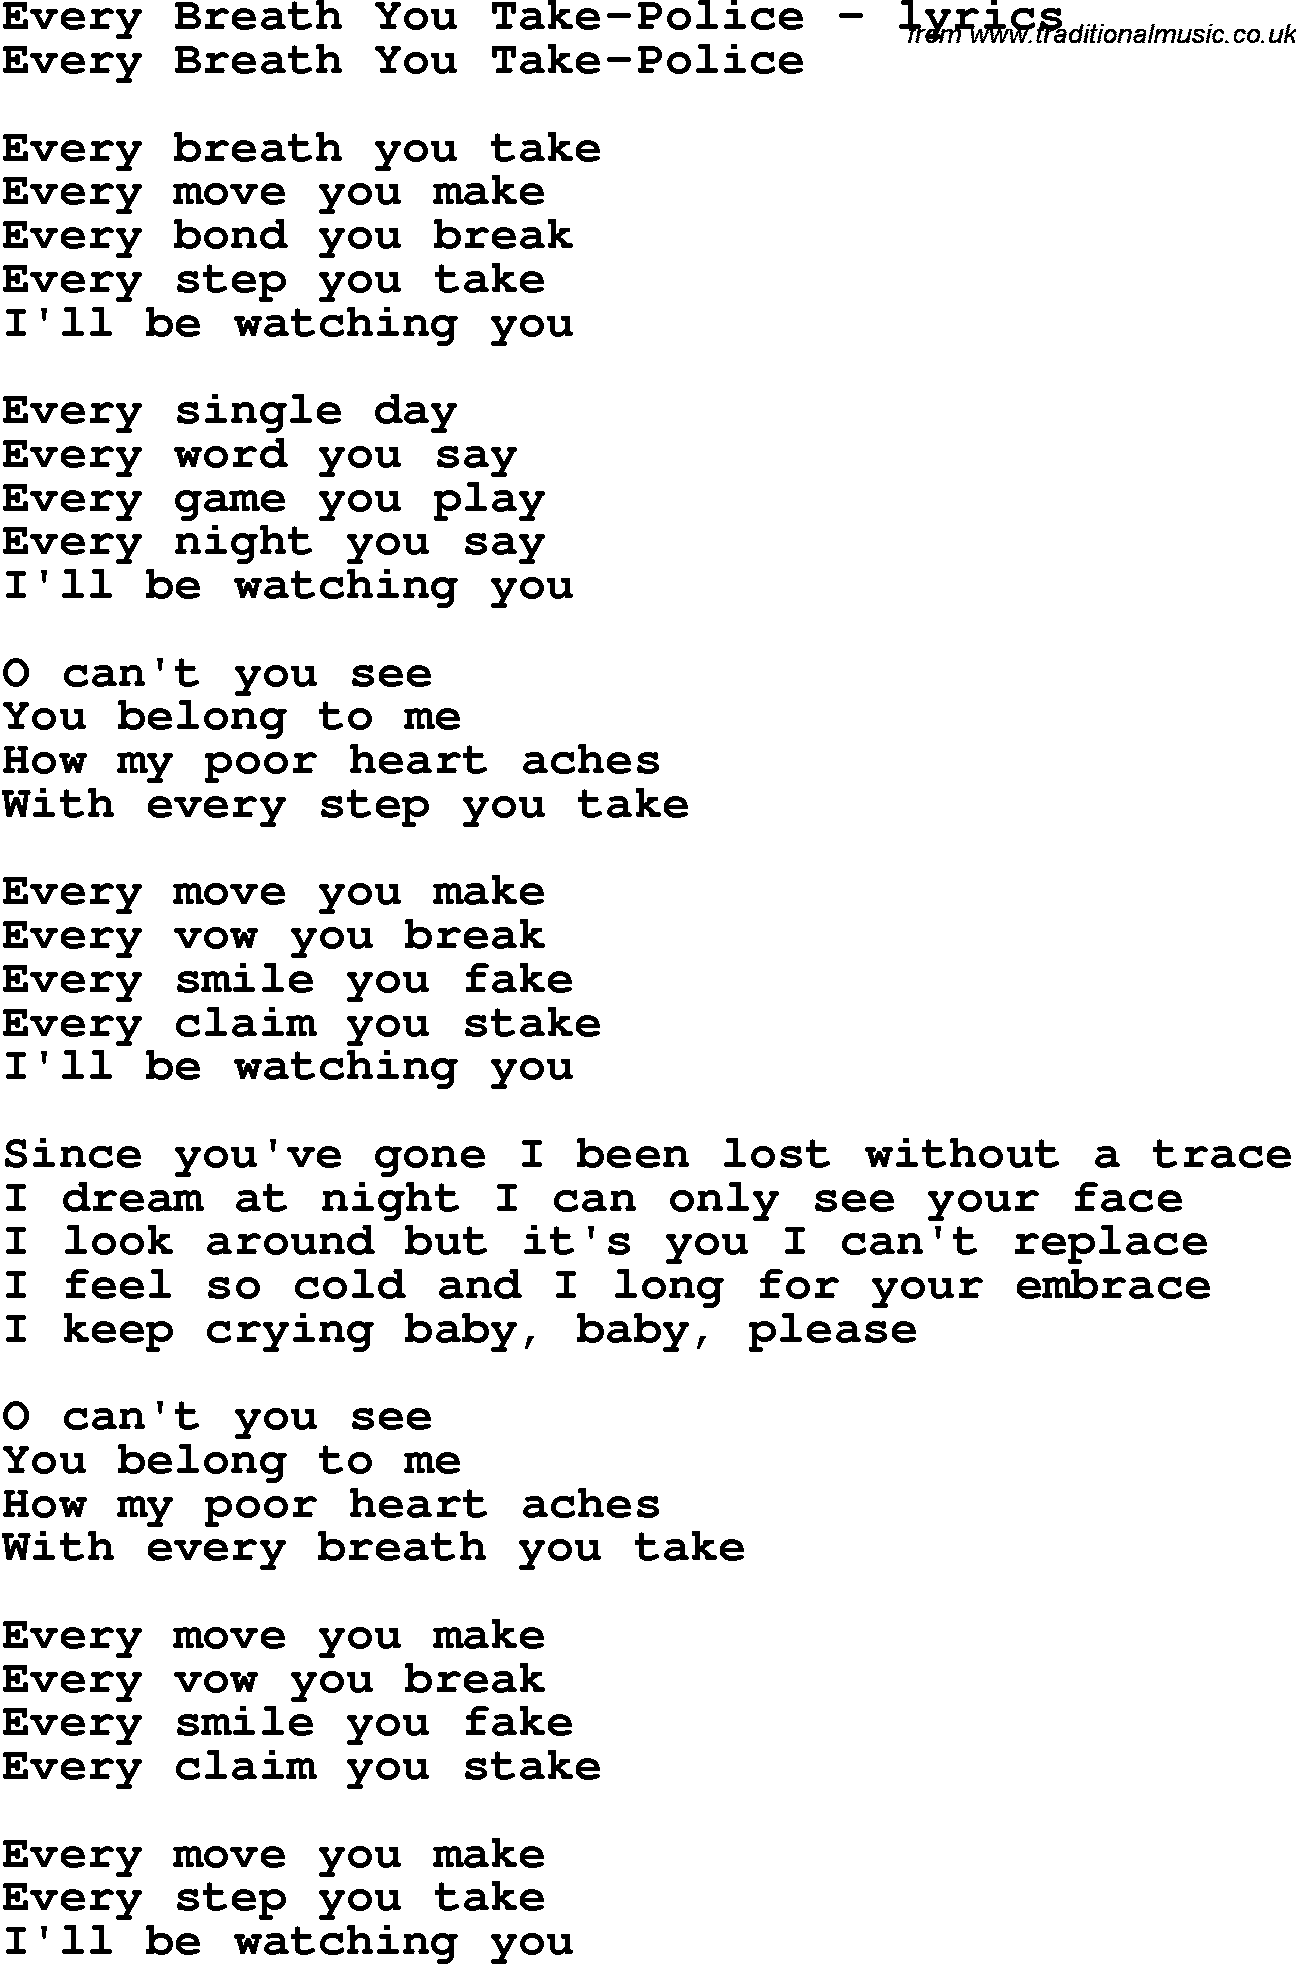 Love Song Lyrics for: Every Breath You Take-Police